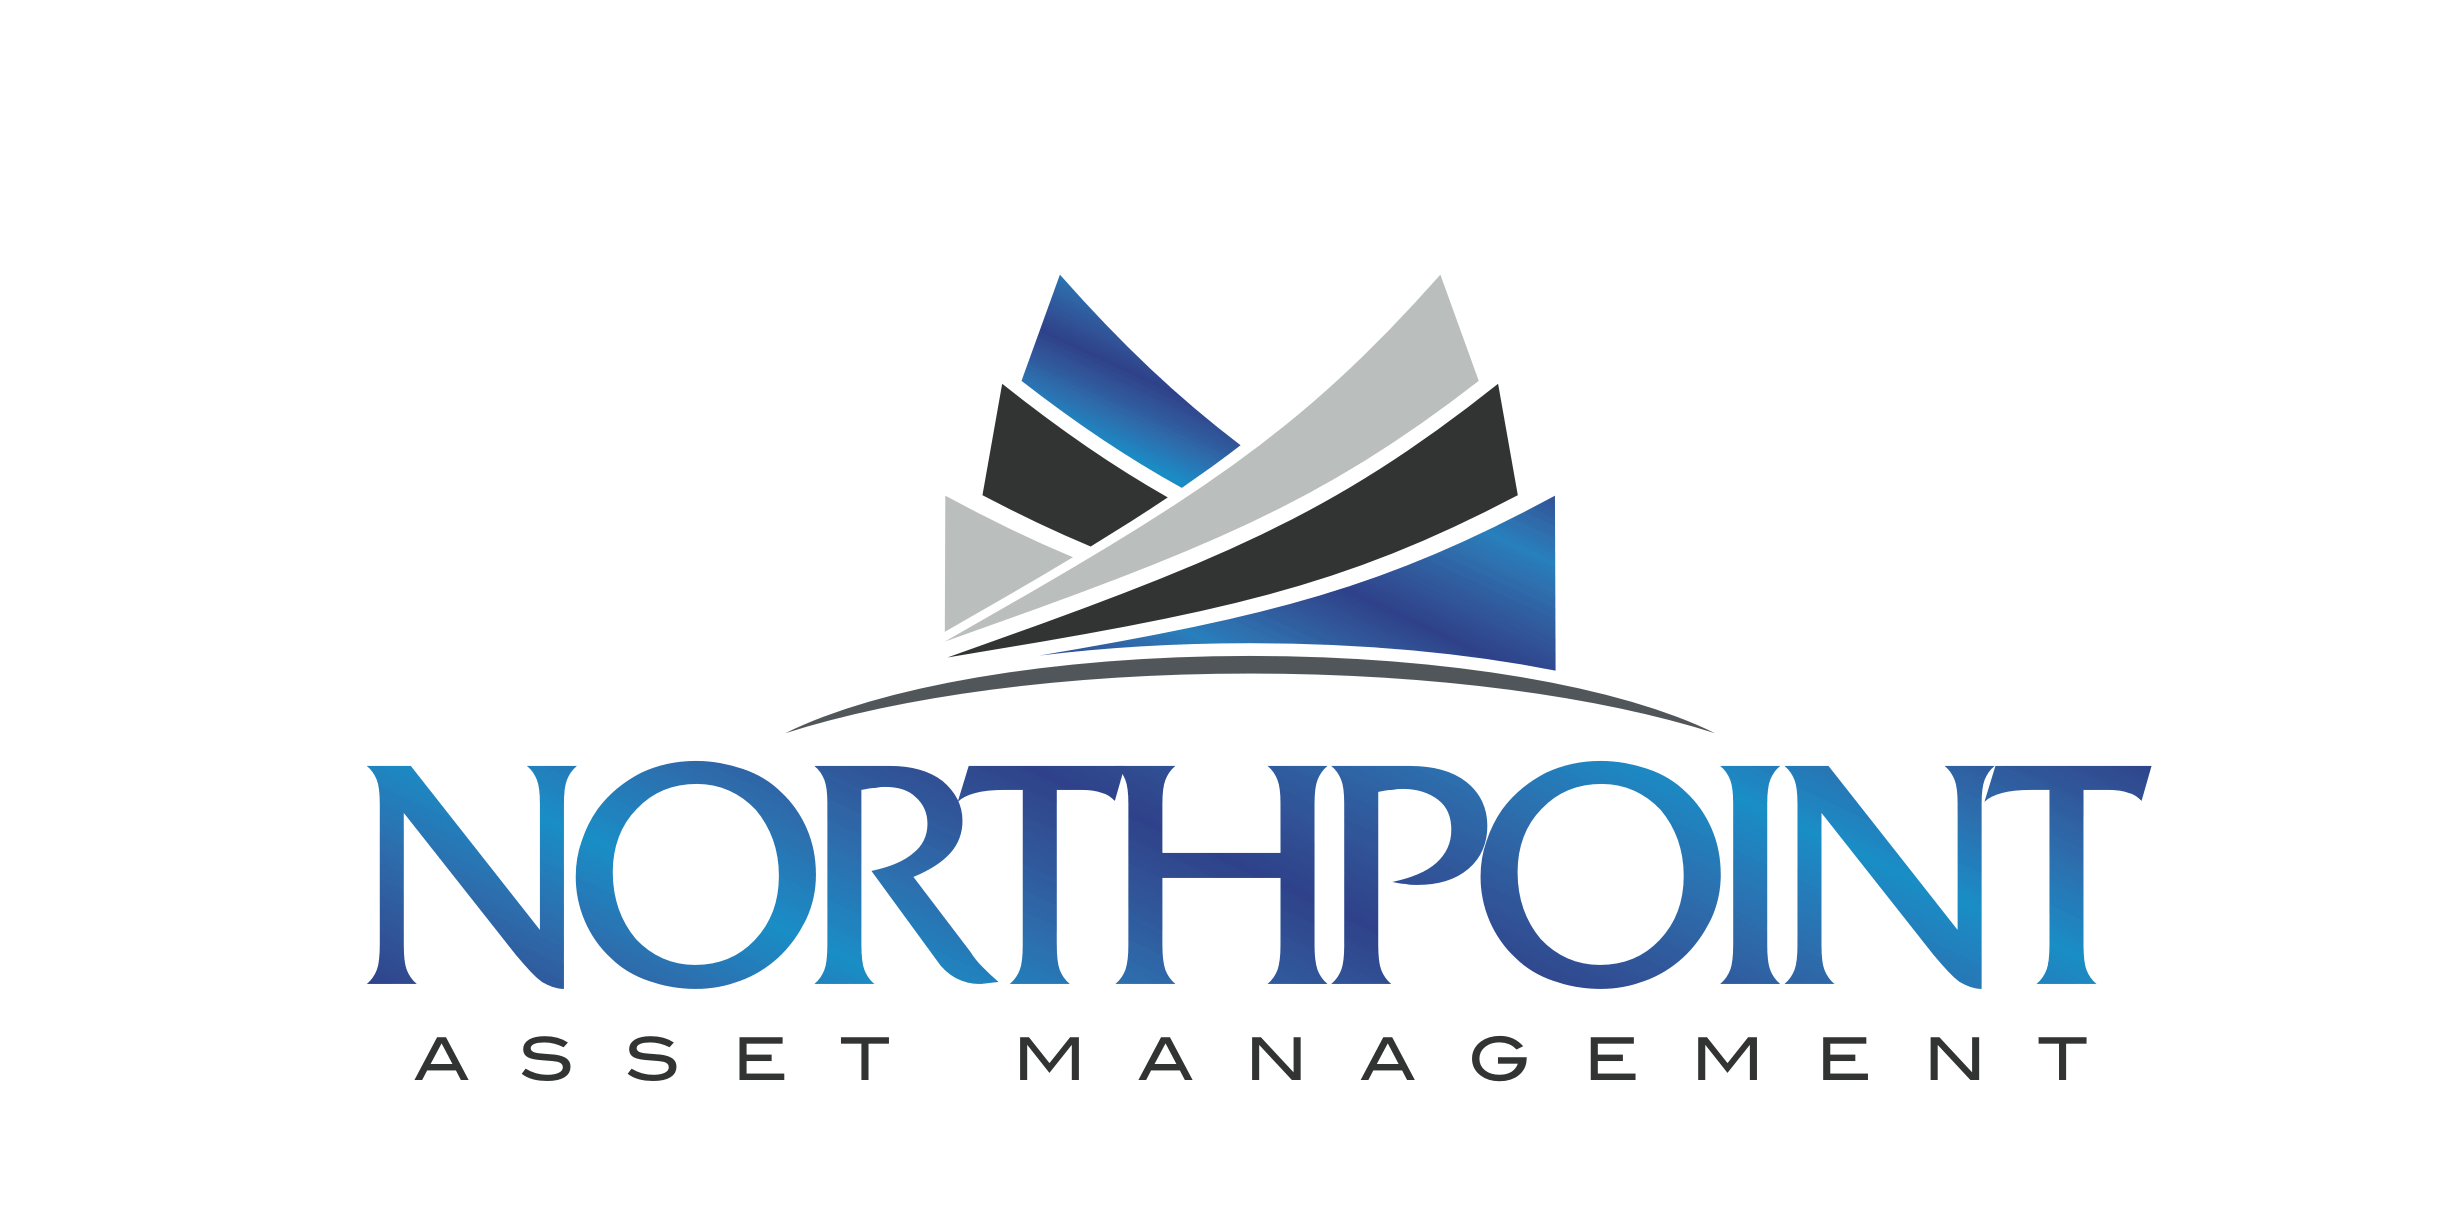 Northpoint Asset Management - CO South logo